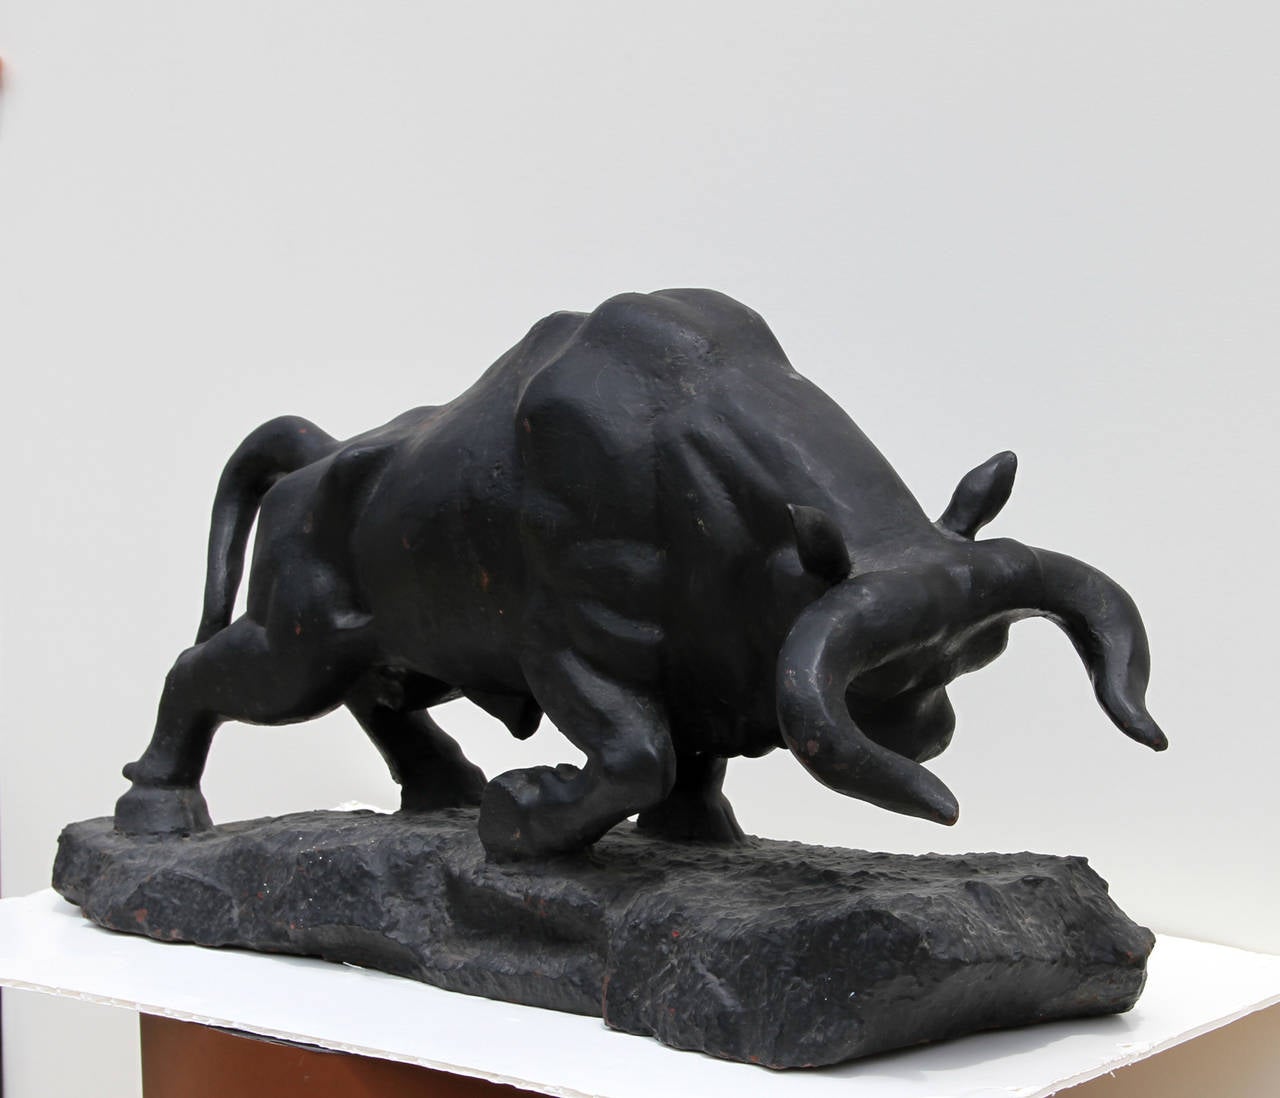 Charging Bull - Sculpture by Unknown